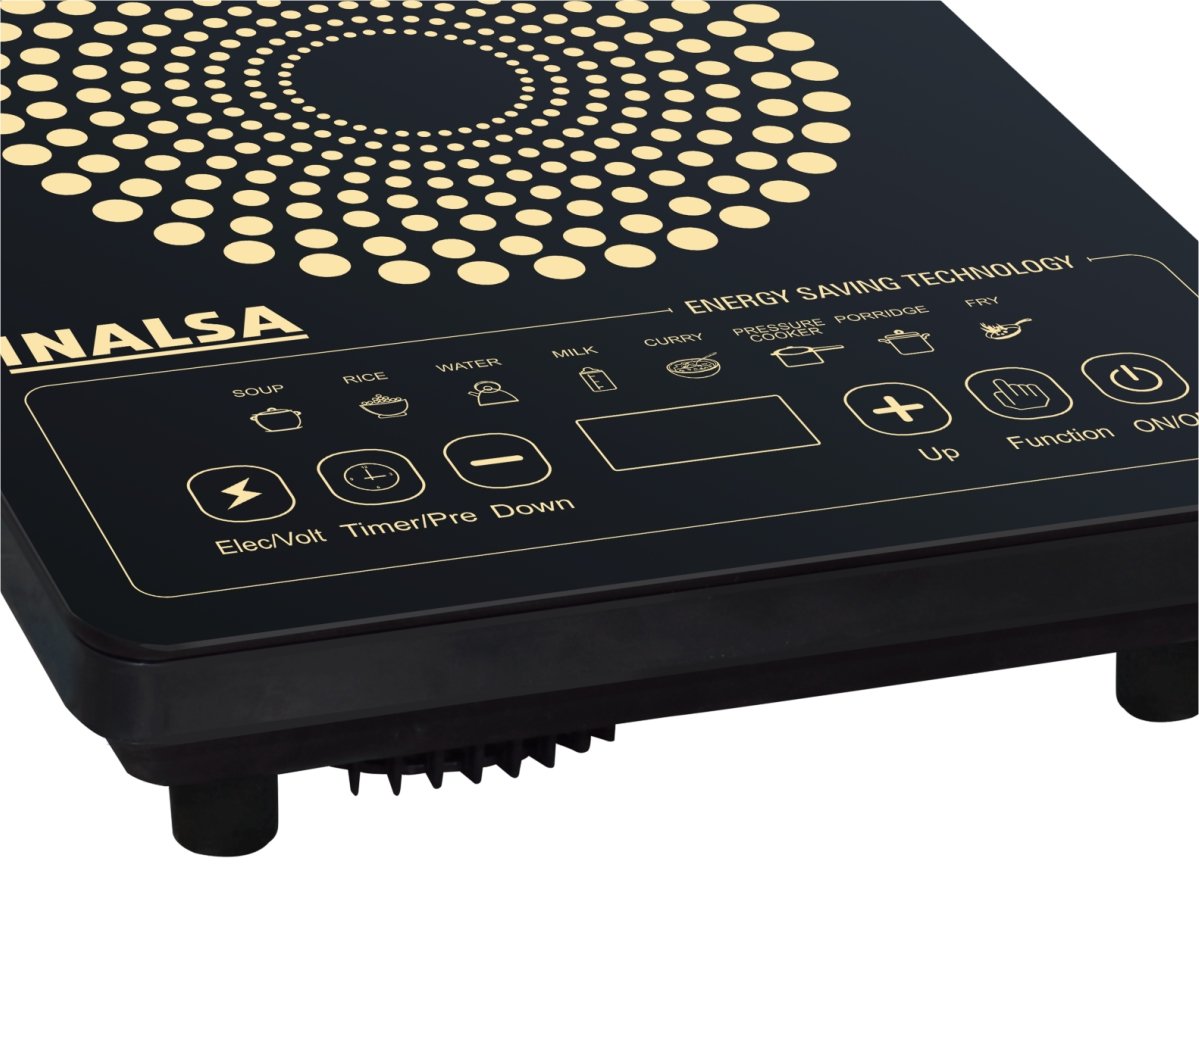 INALSA INDUCTION COOKER EXCEL COOK